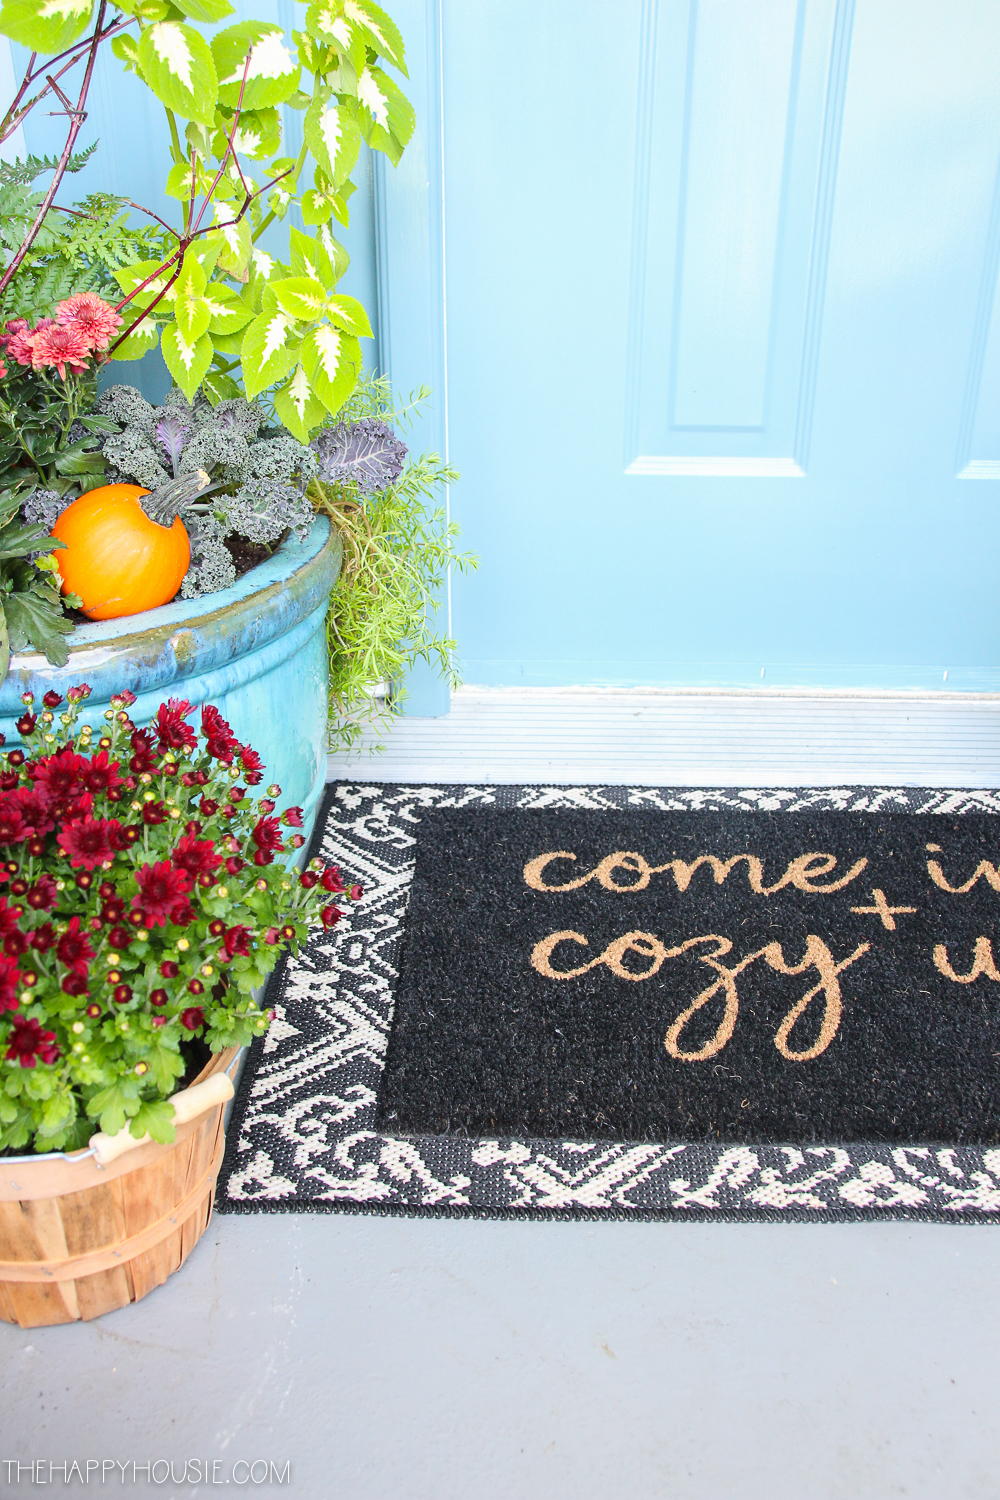 A rug by the front door that welcomes guests.